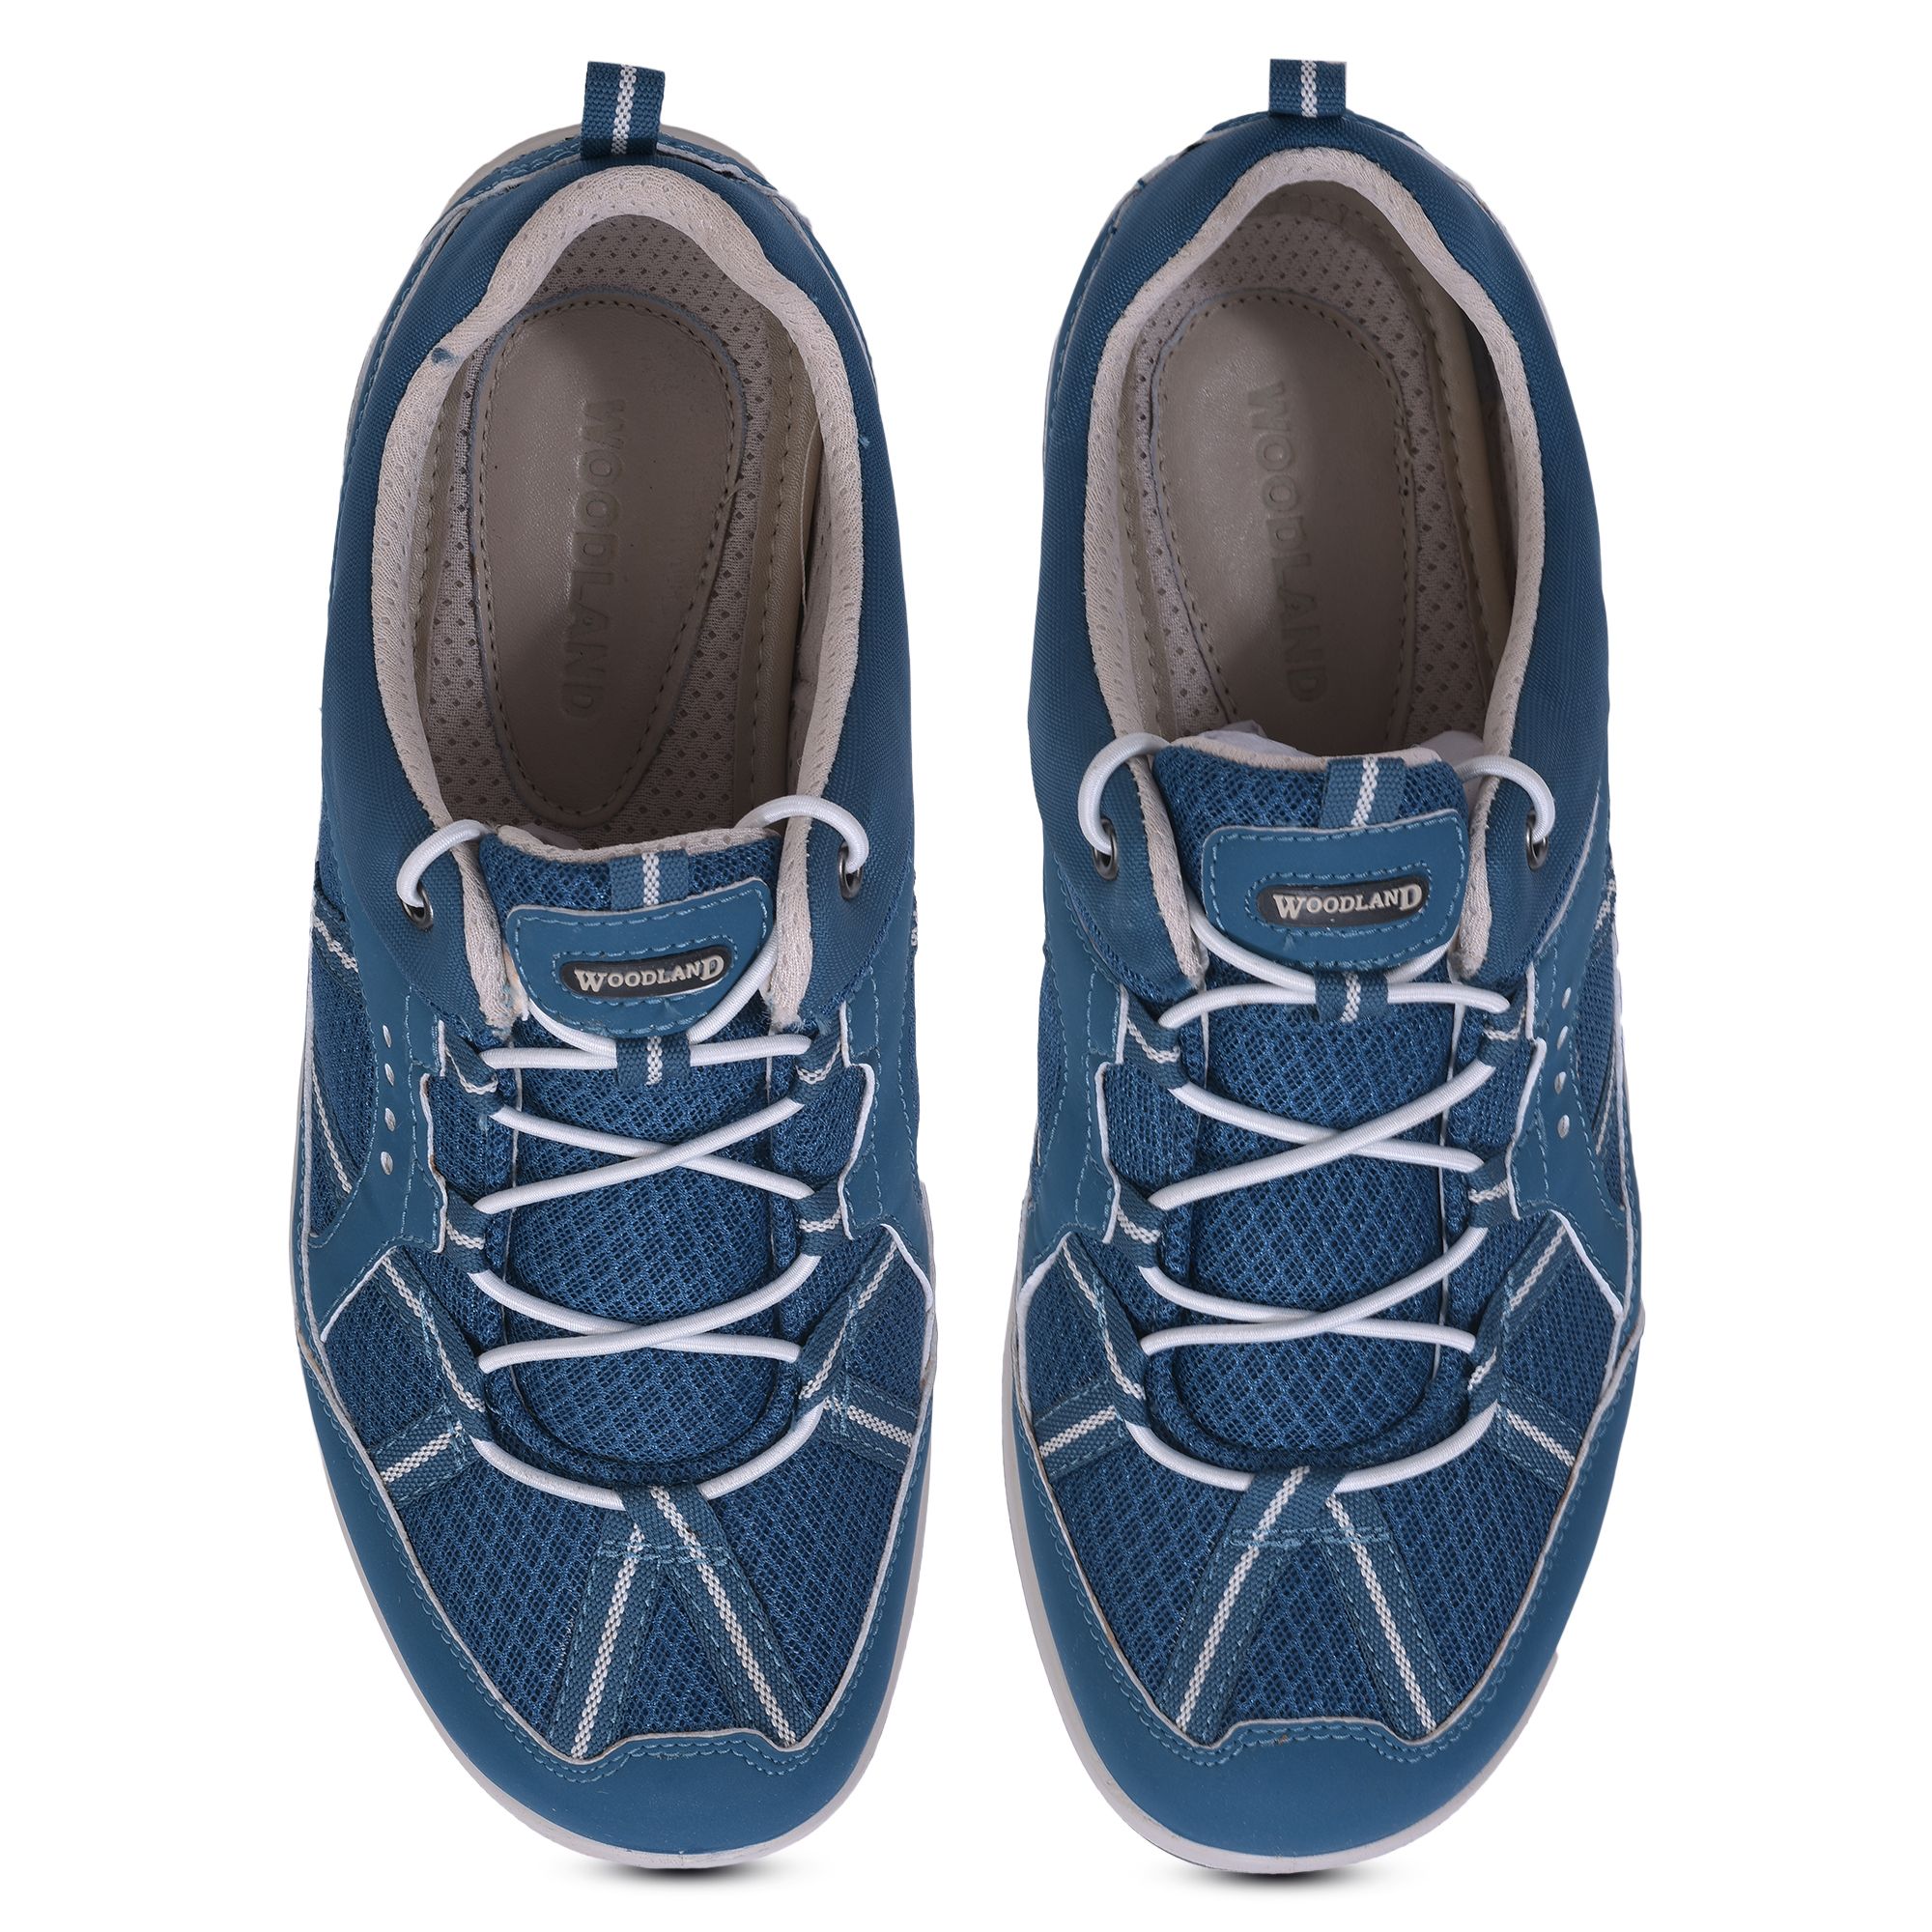 Woodland MOROCCAN BLUE casual shoes for women